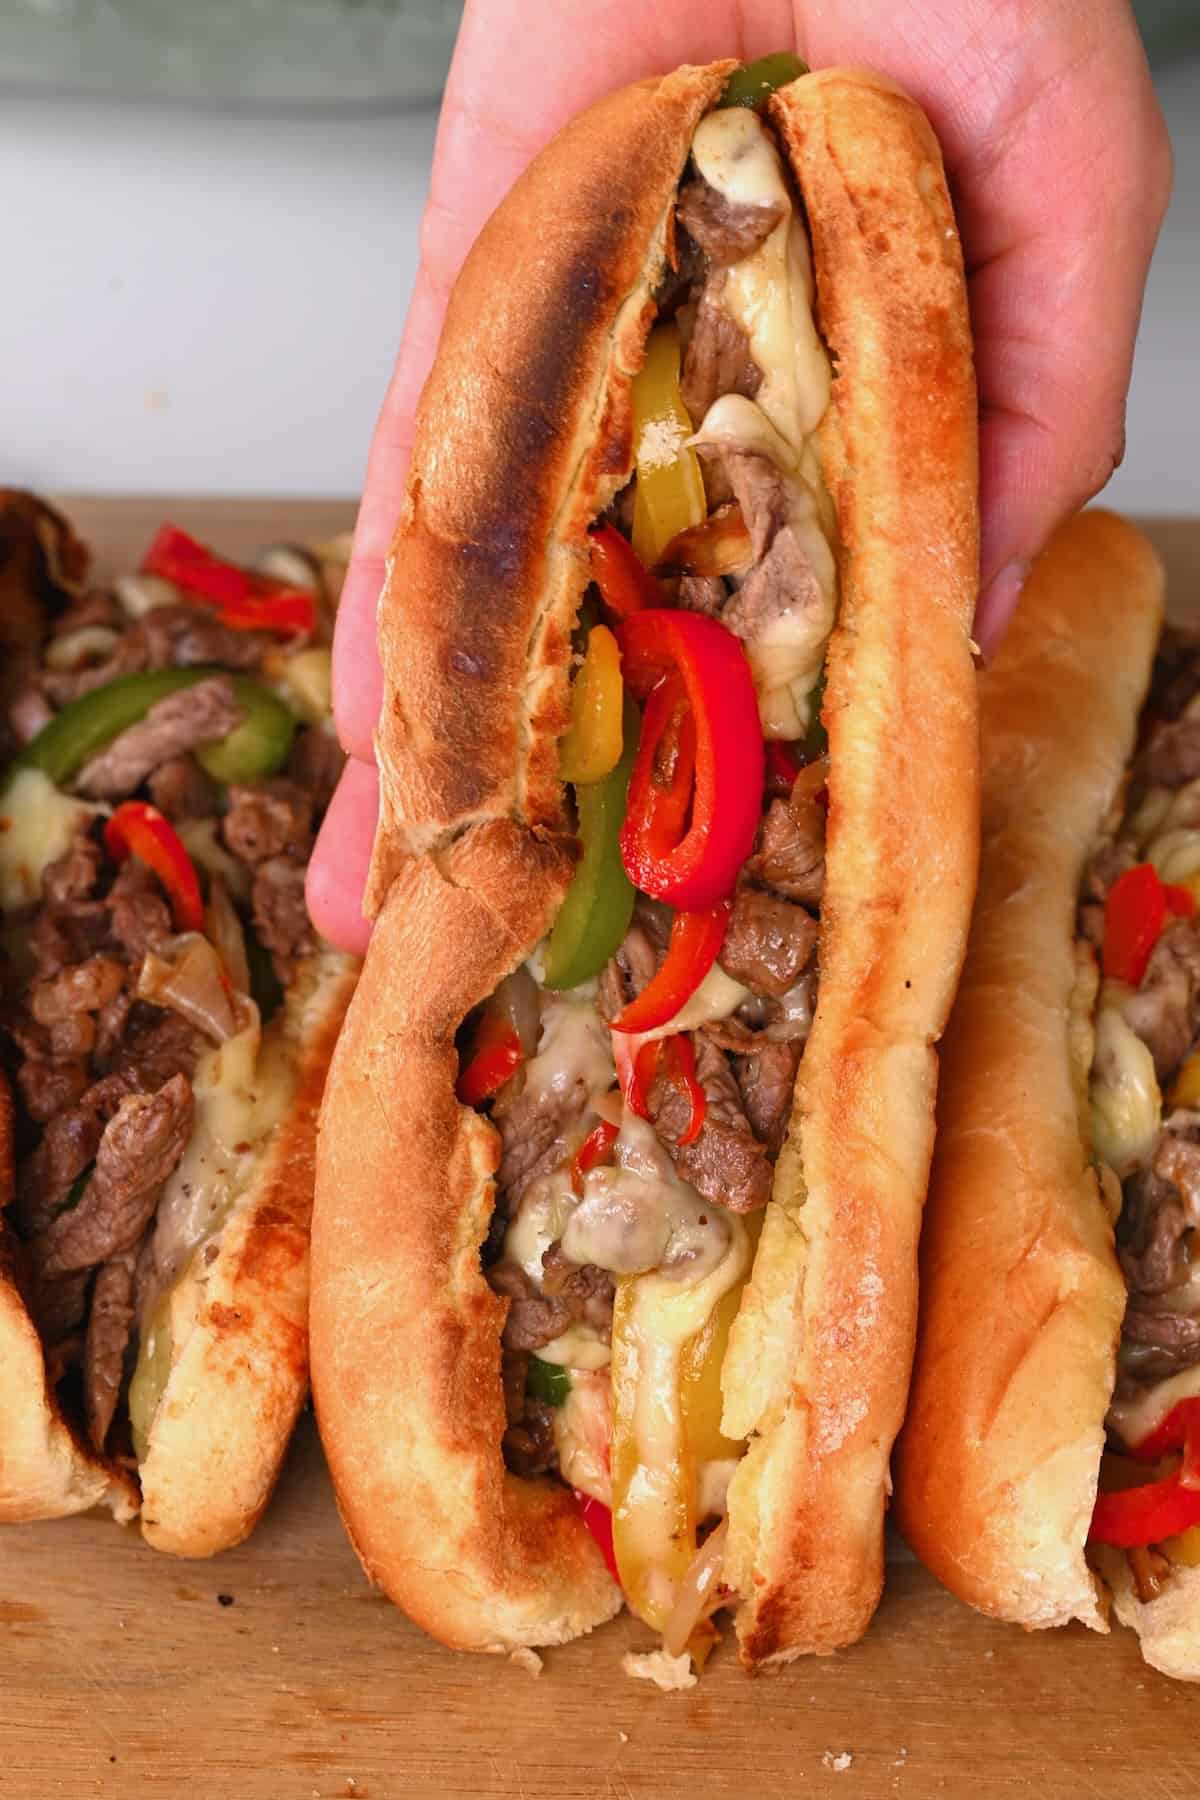 A philly cheesesteak sandwich with bell peppers